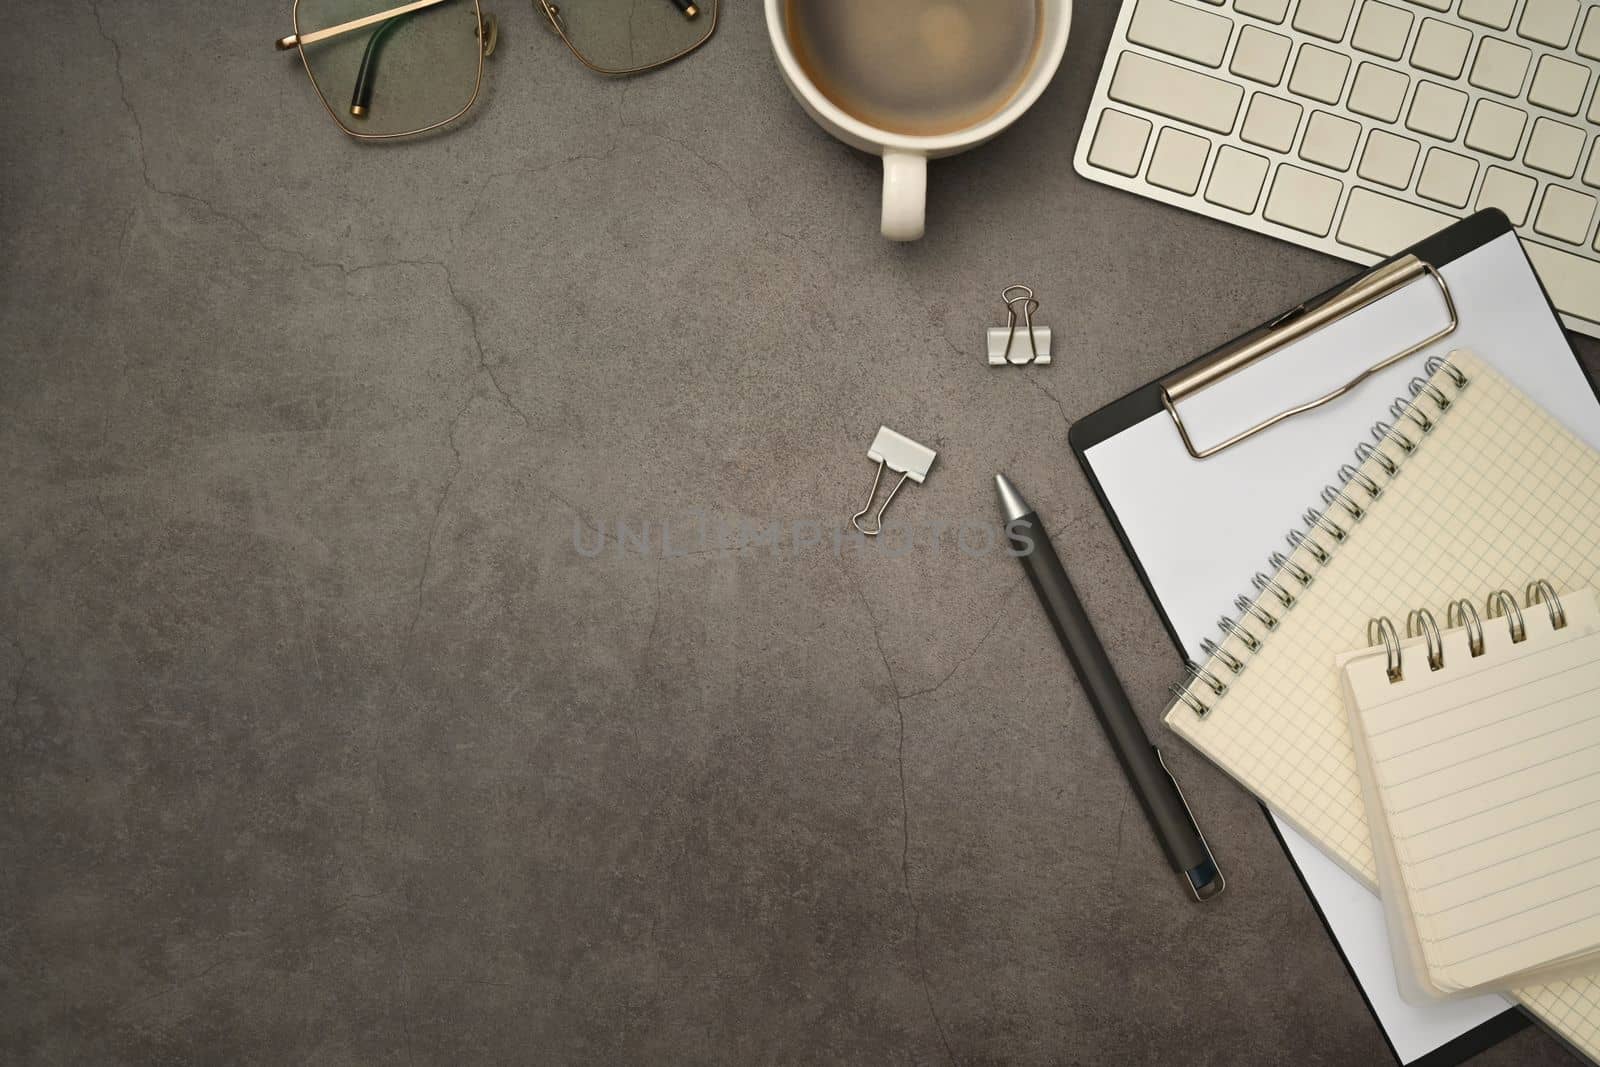 Stylish workplace with cup of coffee, keyboard, blank notepad and glasses on black slate texture background by prathanchorruangsak